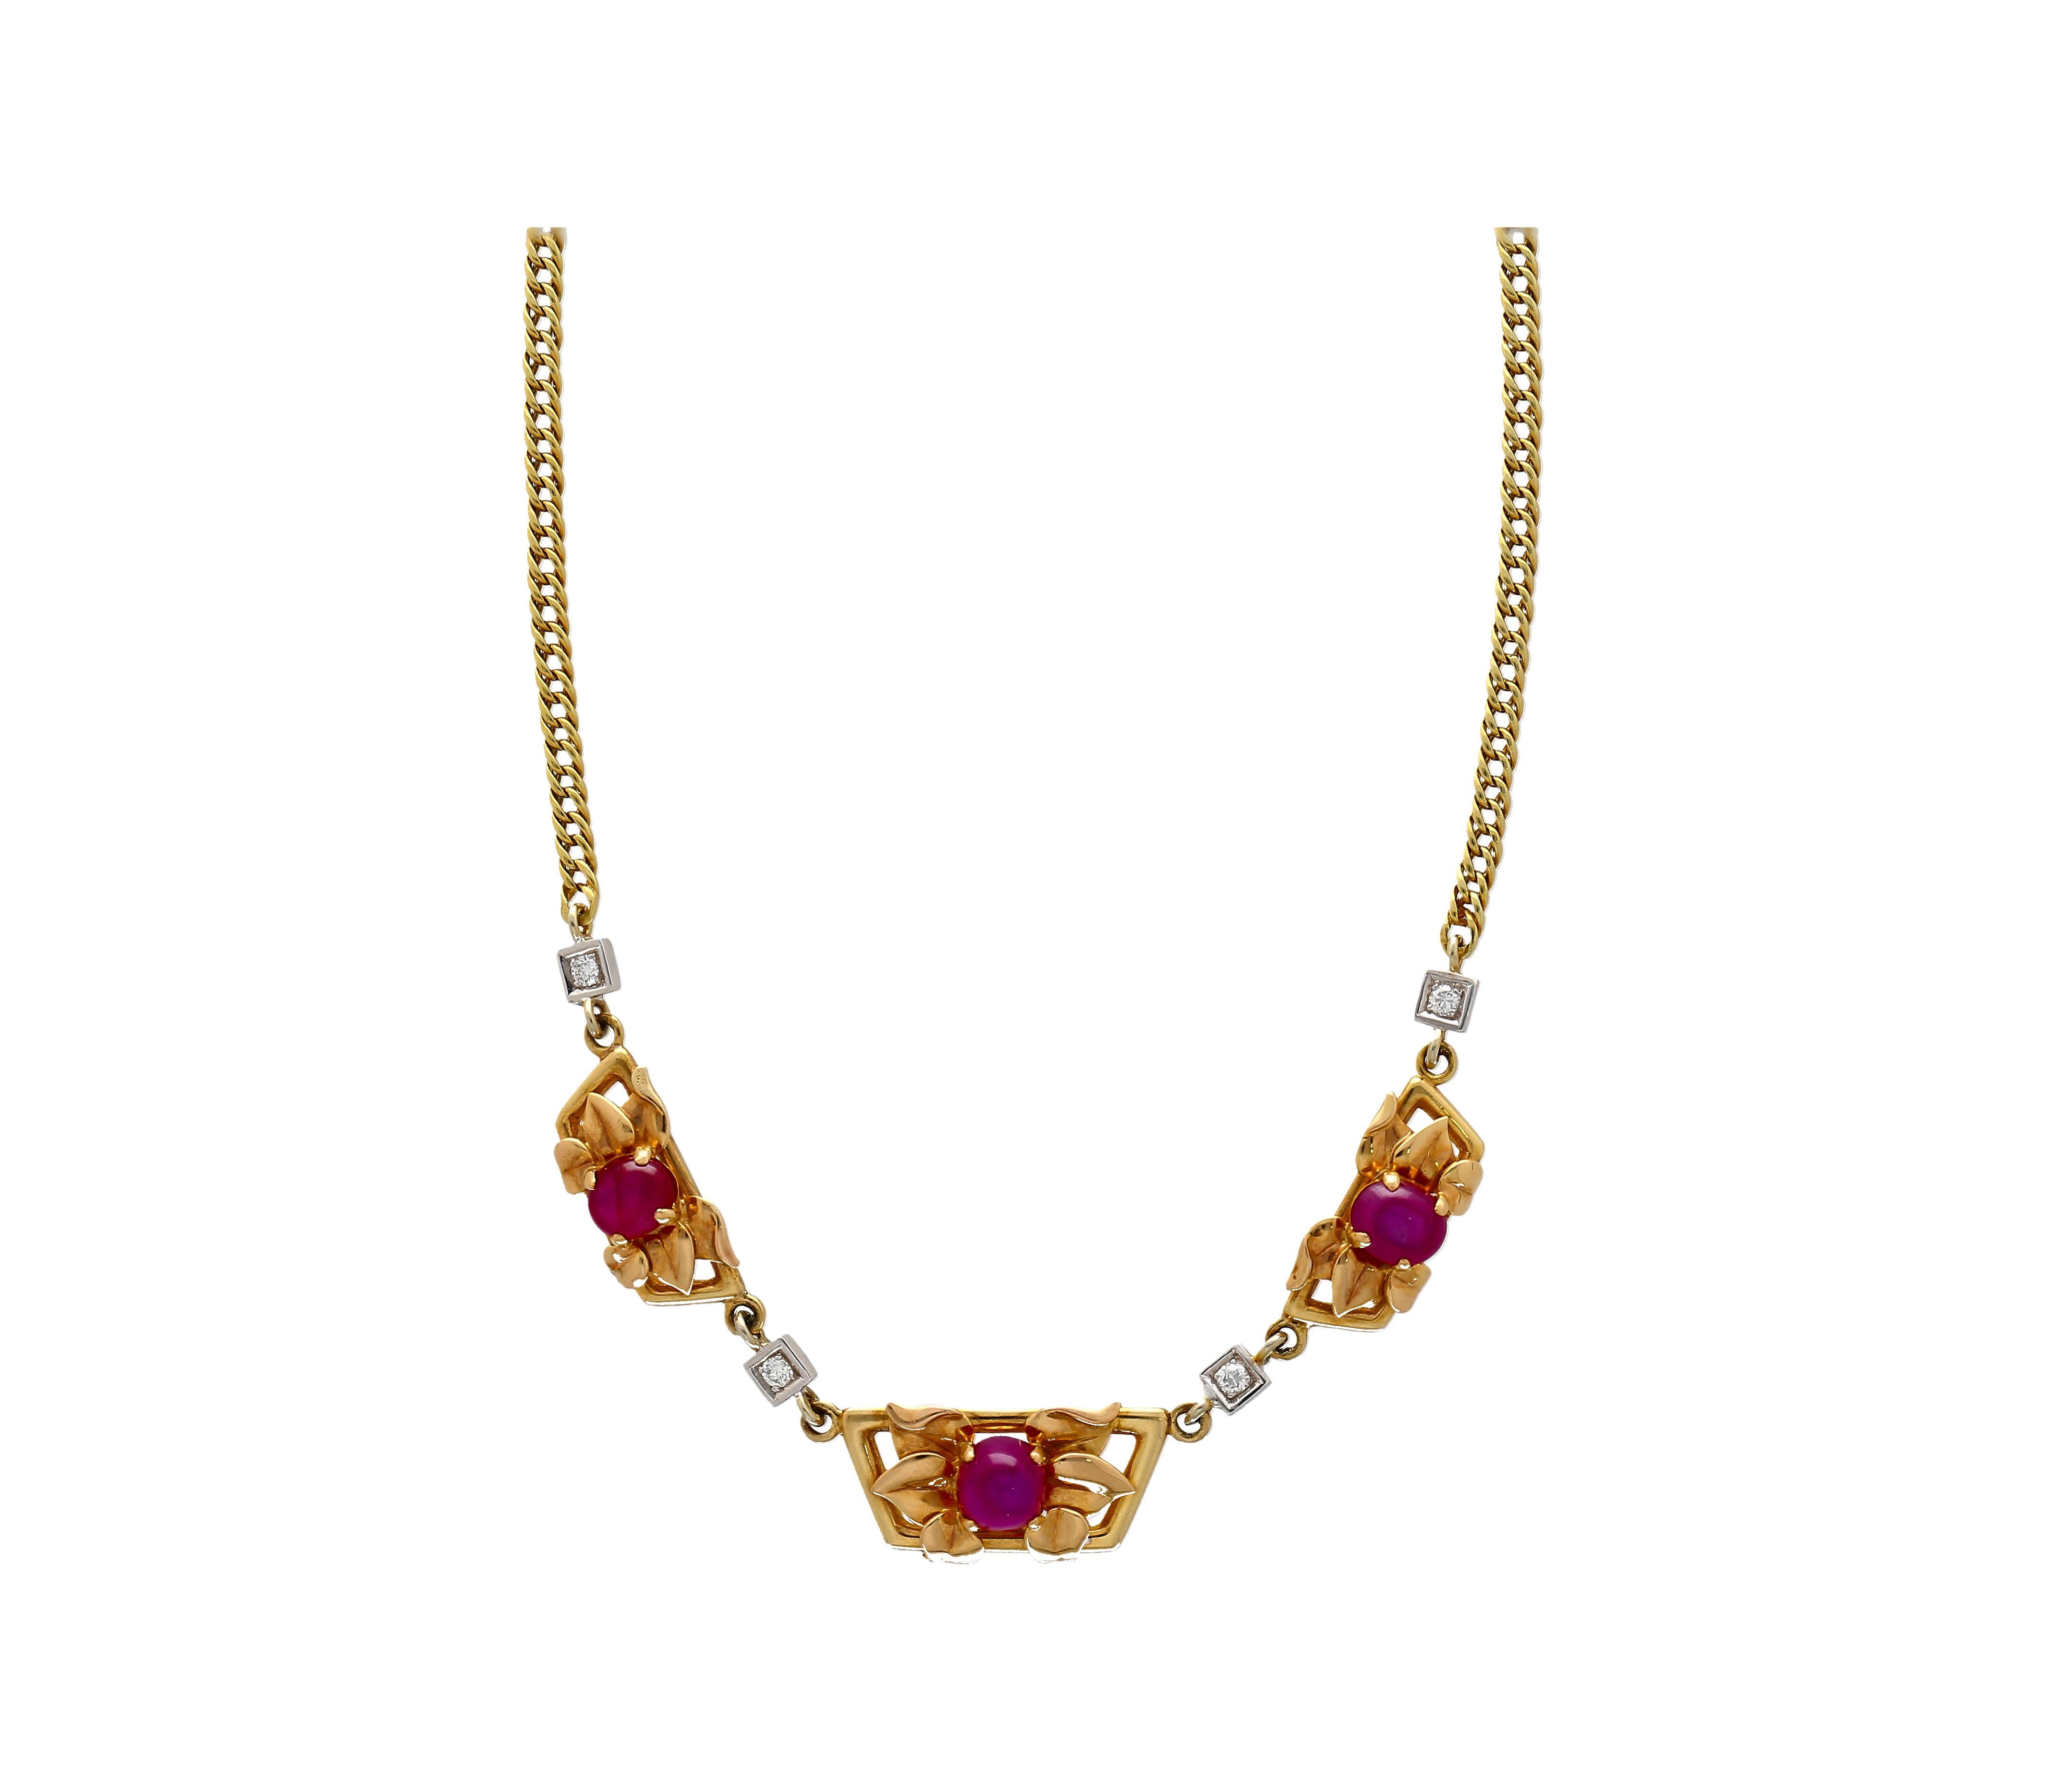 Art Nouveau 6.22 Carat Star-Ruby with Gold Detailing & Diamonds in 14K Gold Charm Necklace For Sale